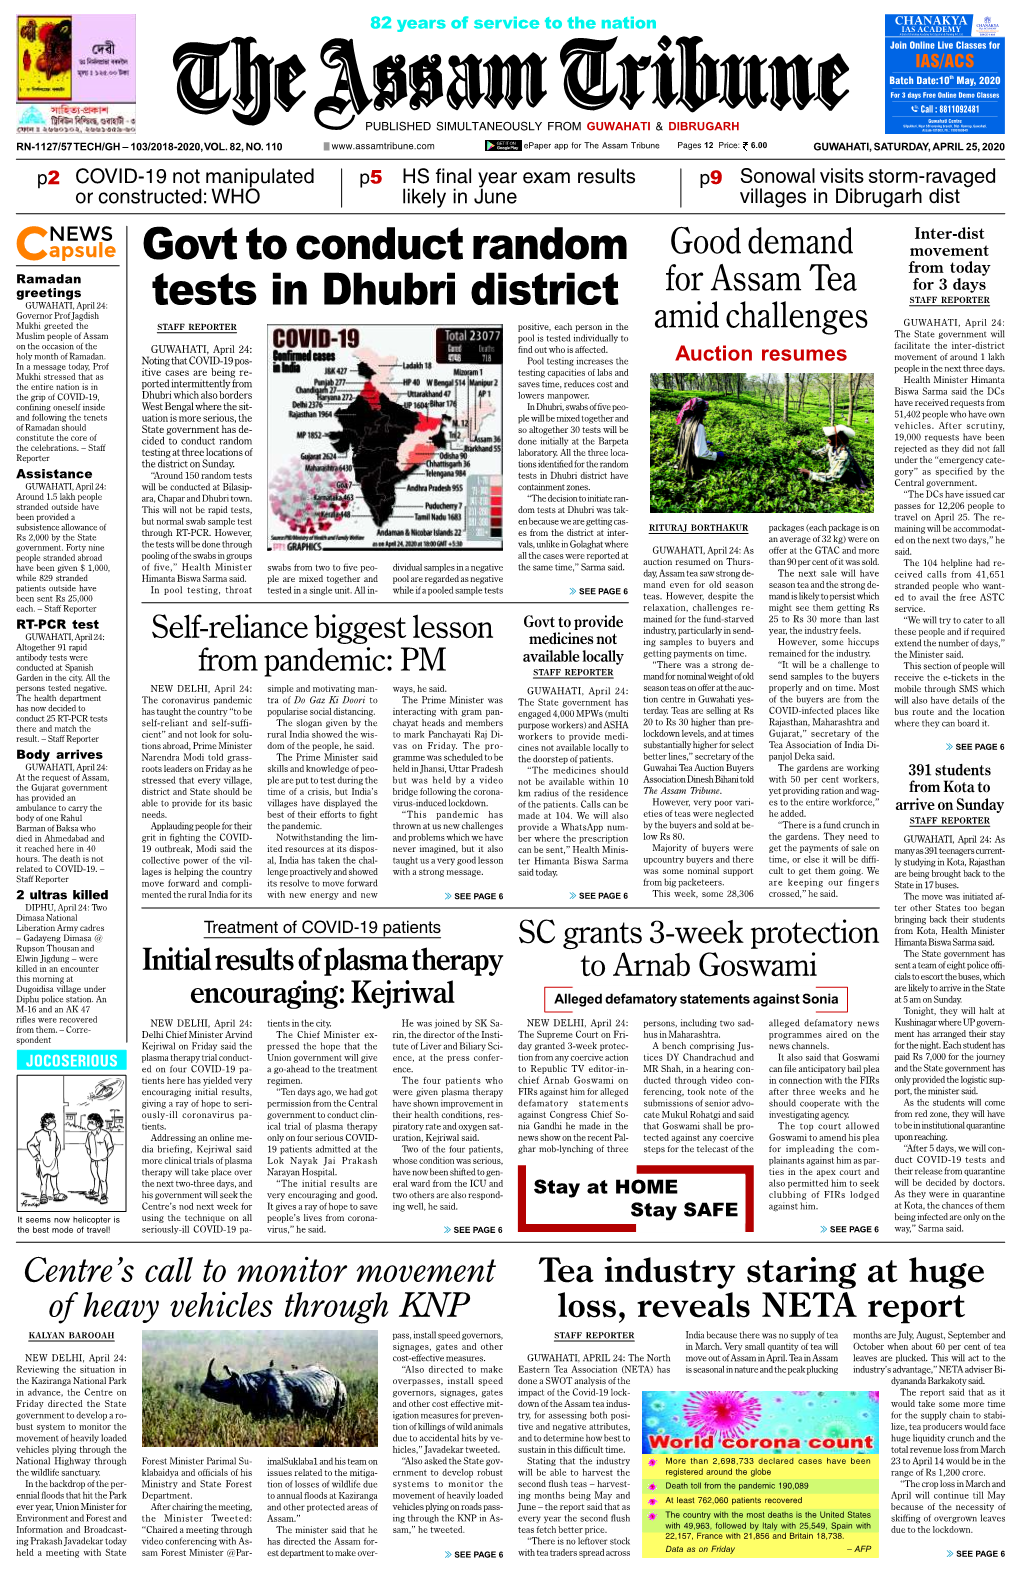 Govt to Conduct Random Tests in Dhubri District